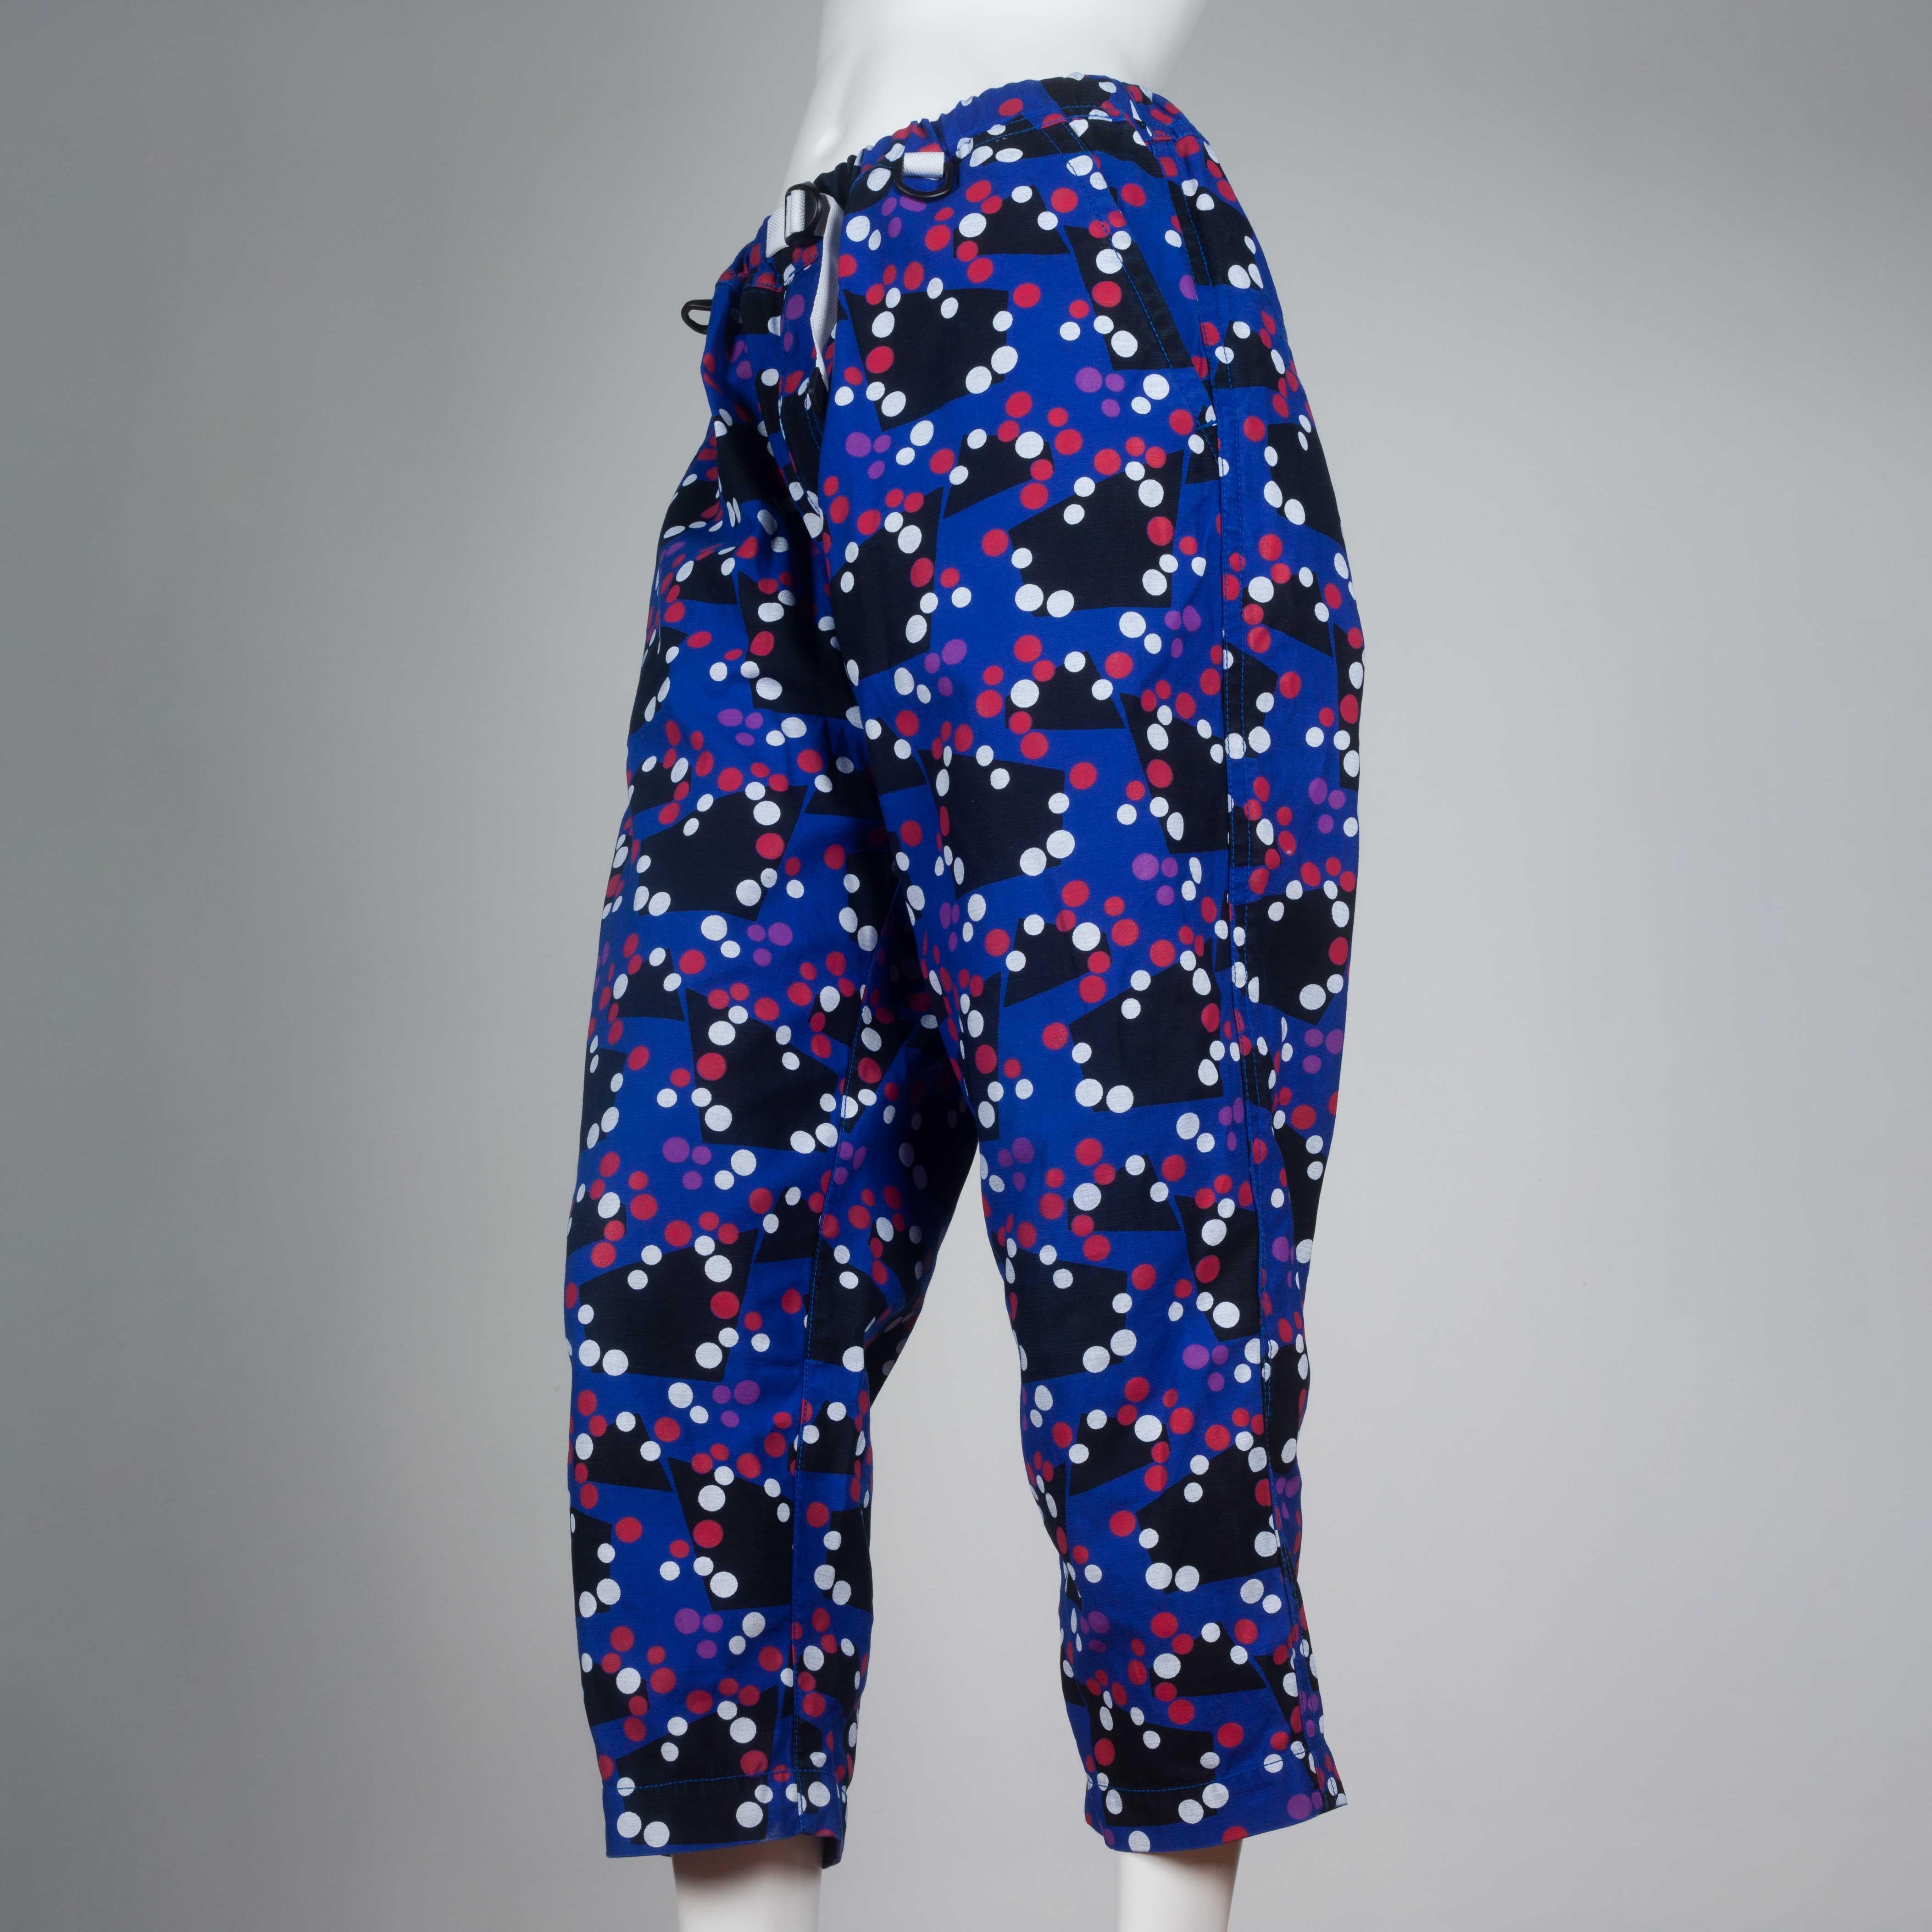 Comme des Garçons Ganryu 2012 trousers in blue with black geometric pattern, and covered in red and white dots. Elastic waist with a white adjustable integrated belt. Yayoi Kusama feels. 
 
YEAR: 2012
MARKED SIZE: M
US WOMEN'S: M
US MEN'S: S
FIT: